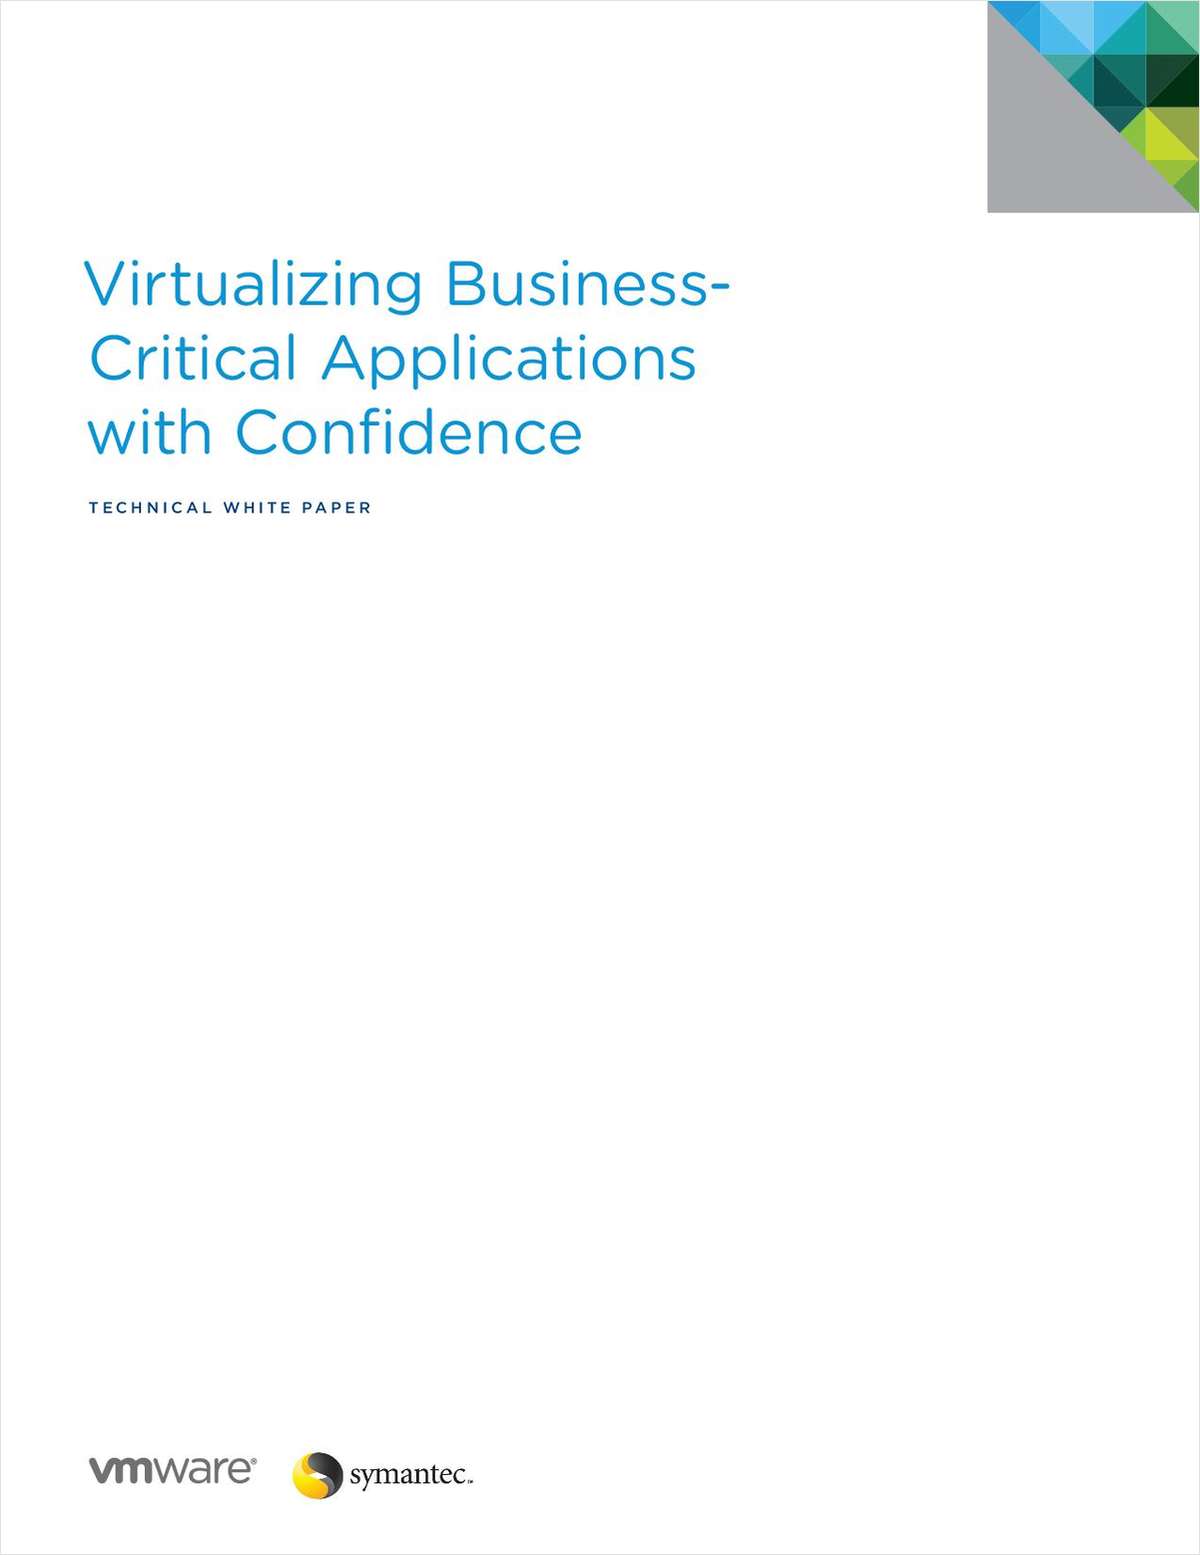 Virtualizing Business-Critical Applications with Confidence